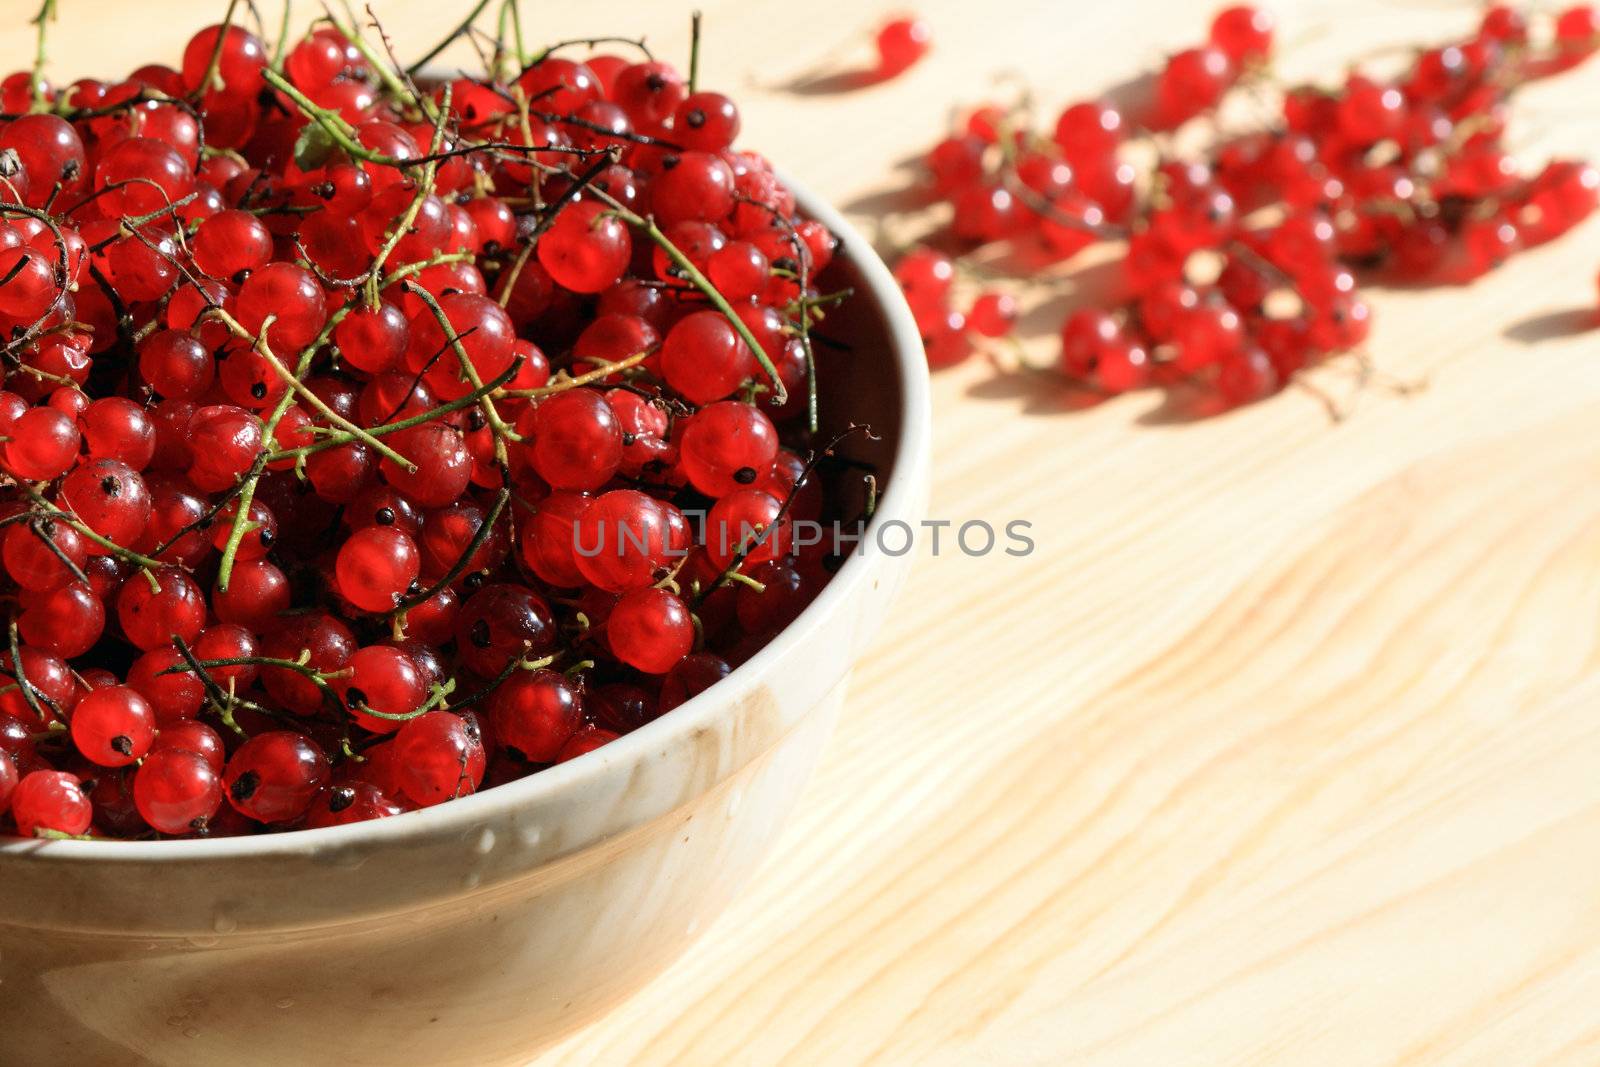 Closeup of red currants in a bowl isolated on wooden background